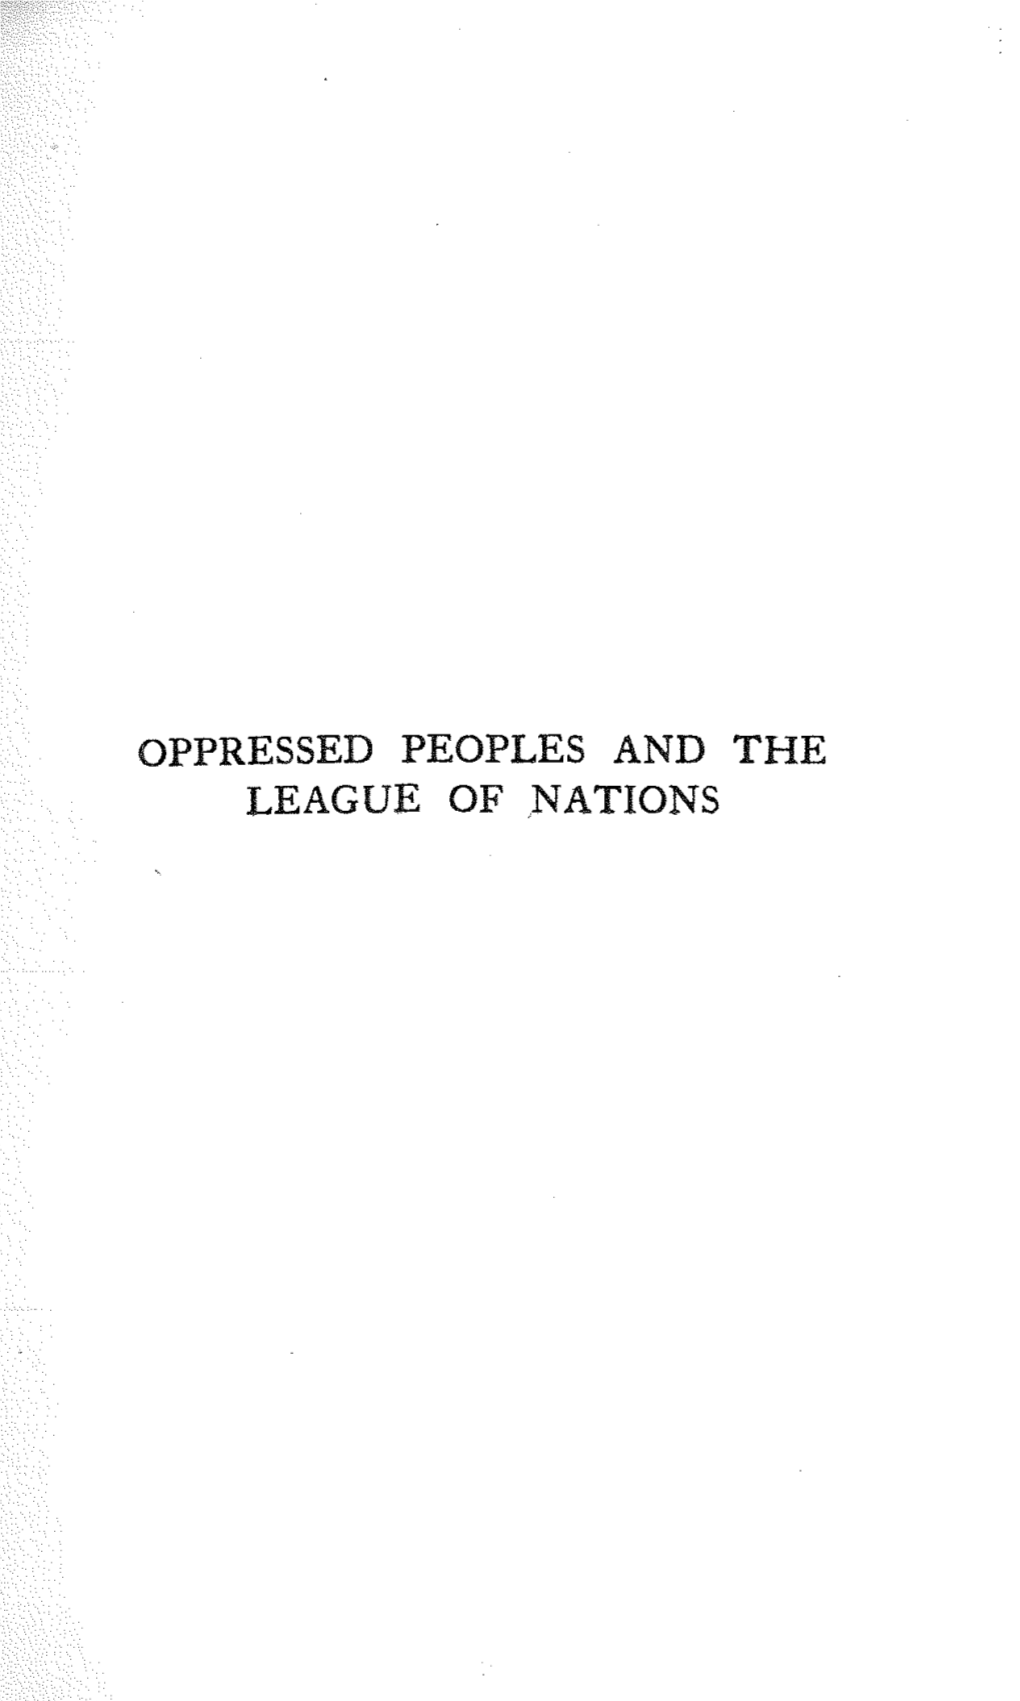 OPPRESSED PEOPLES and the LEAGUE of NATIONS ~~ by NOEL BUXTON OPPRESSED PEOPLES I EUROPE and the TURKS and the I11-E -~1.:T with the BULGARIAN STAFF LEAGUE OF